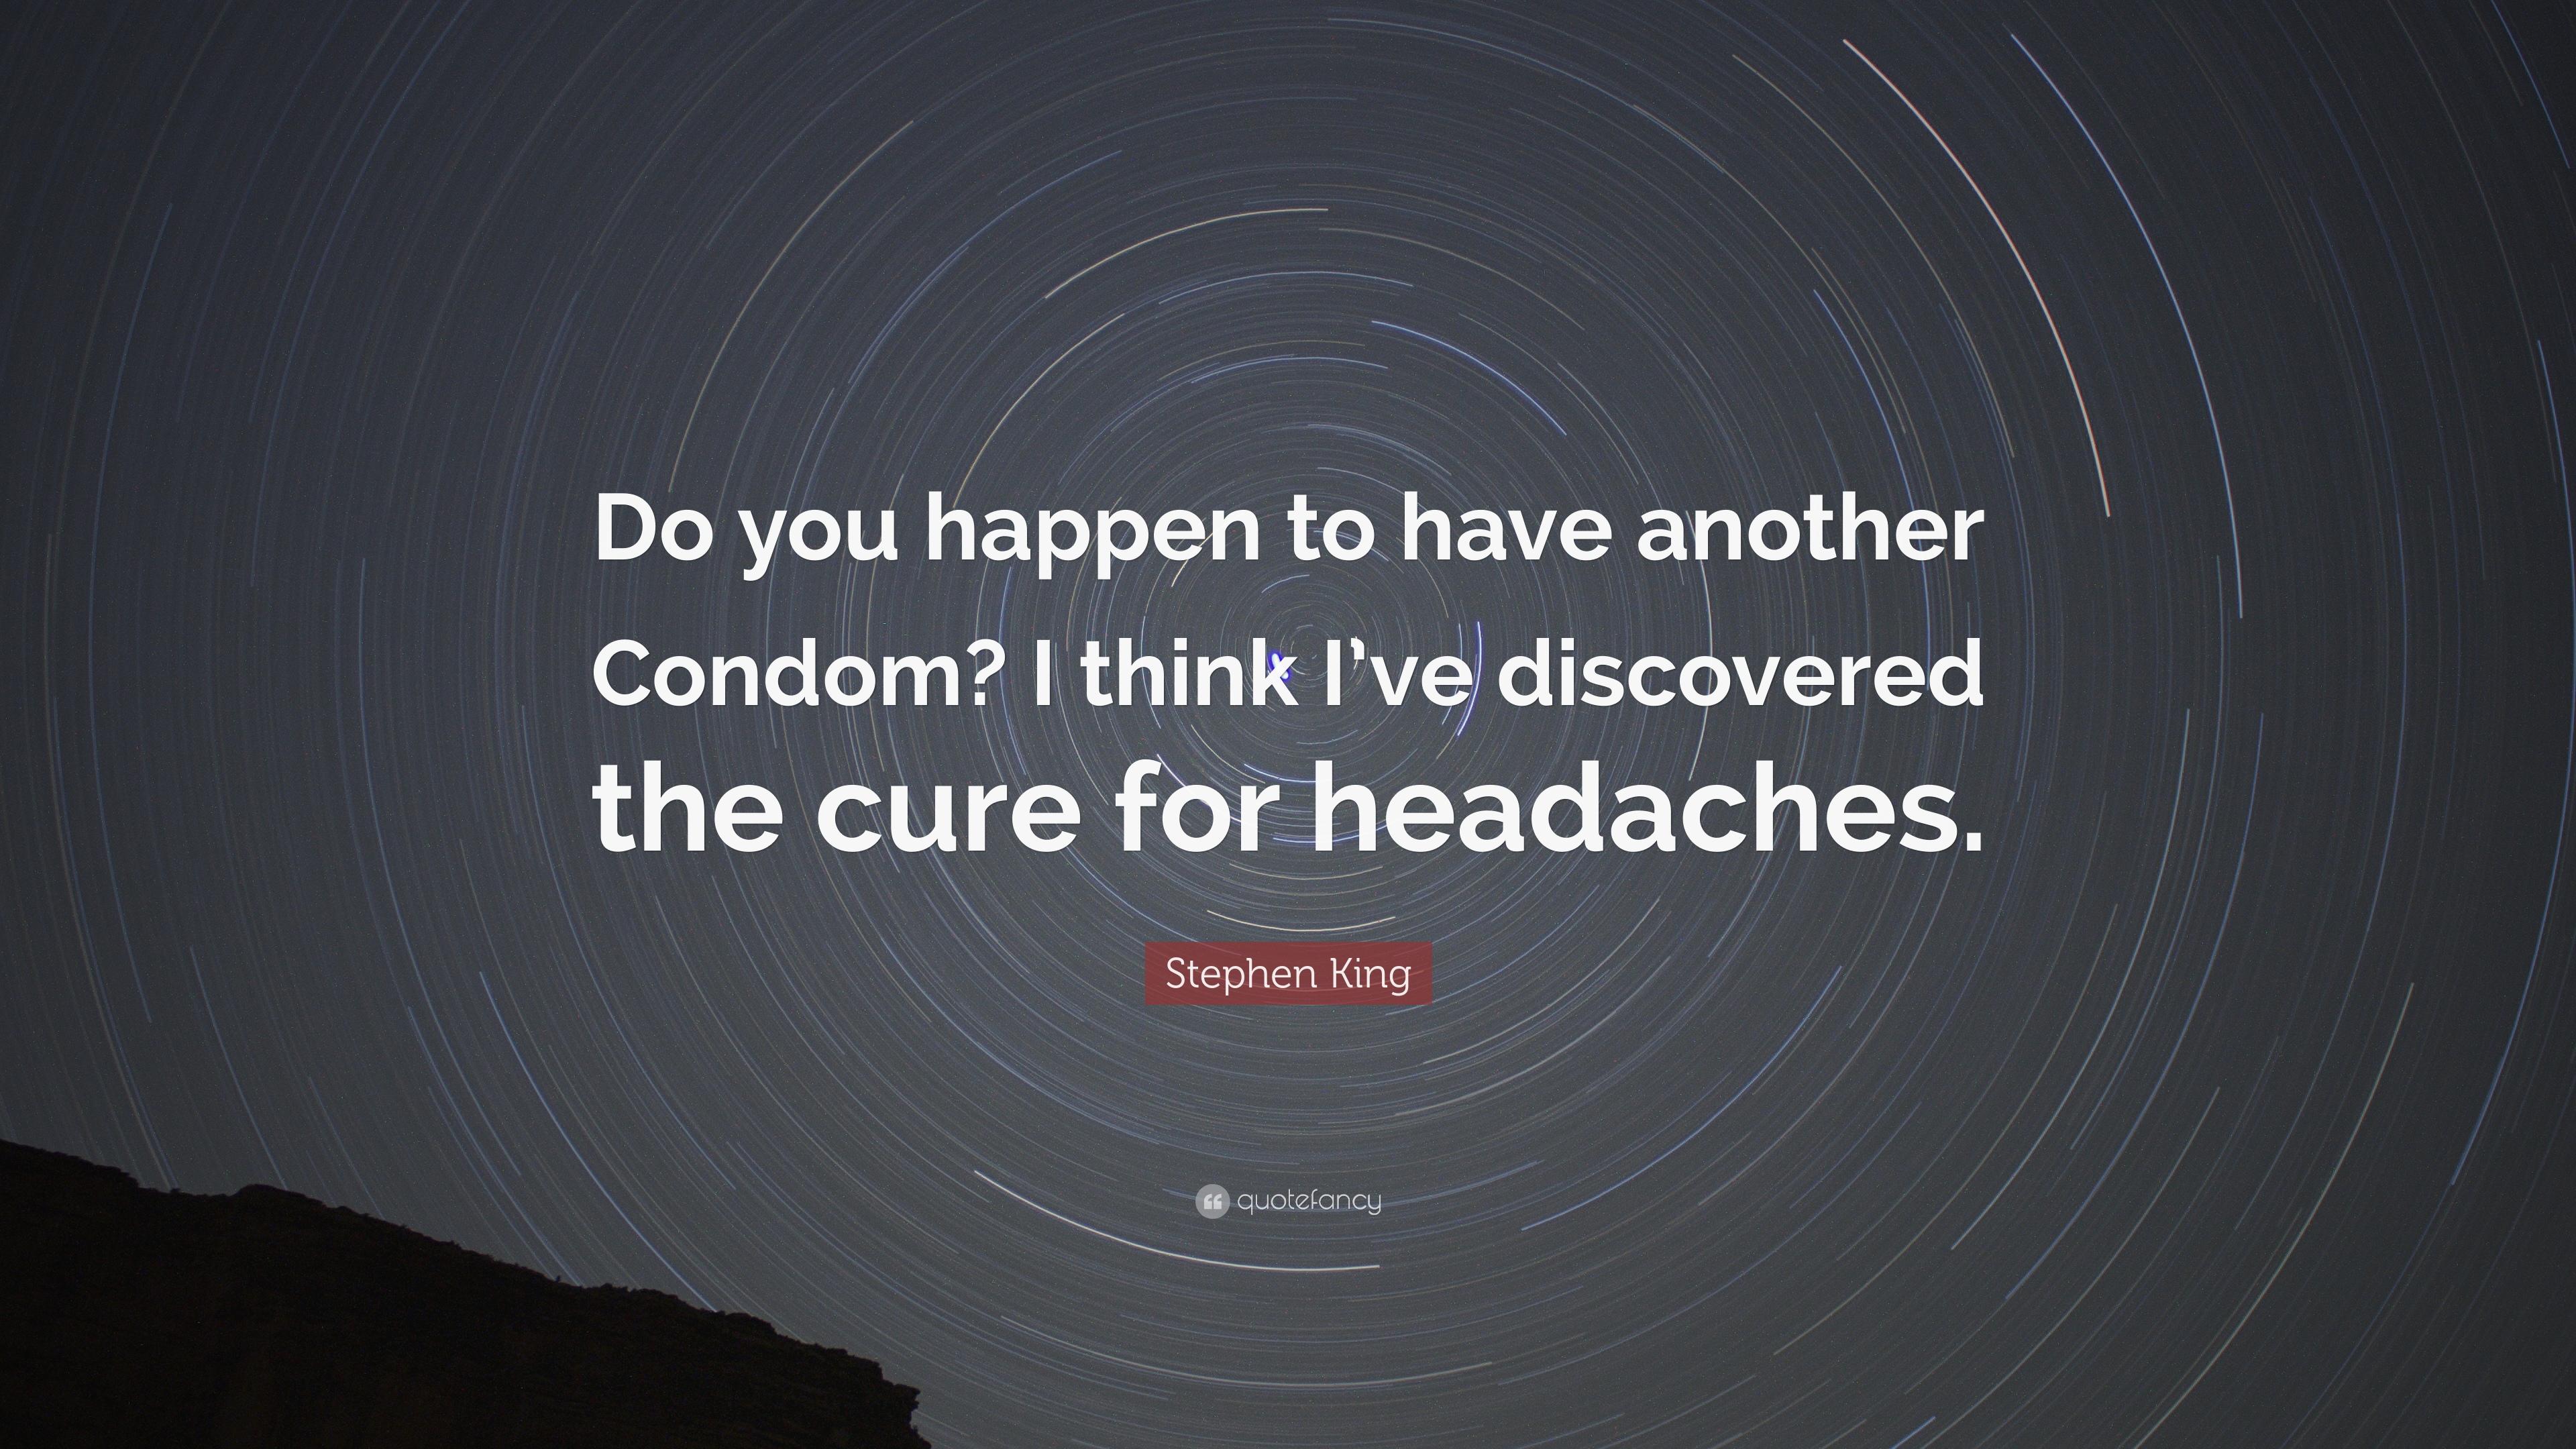 Stephen King Quote: “Do you happen to have another Condom? I think I